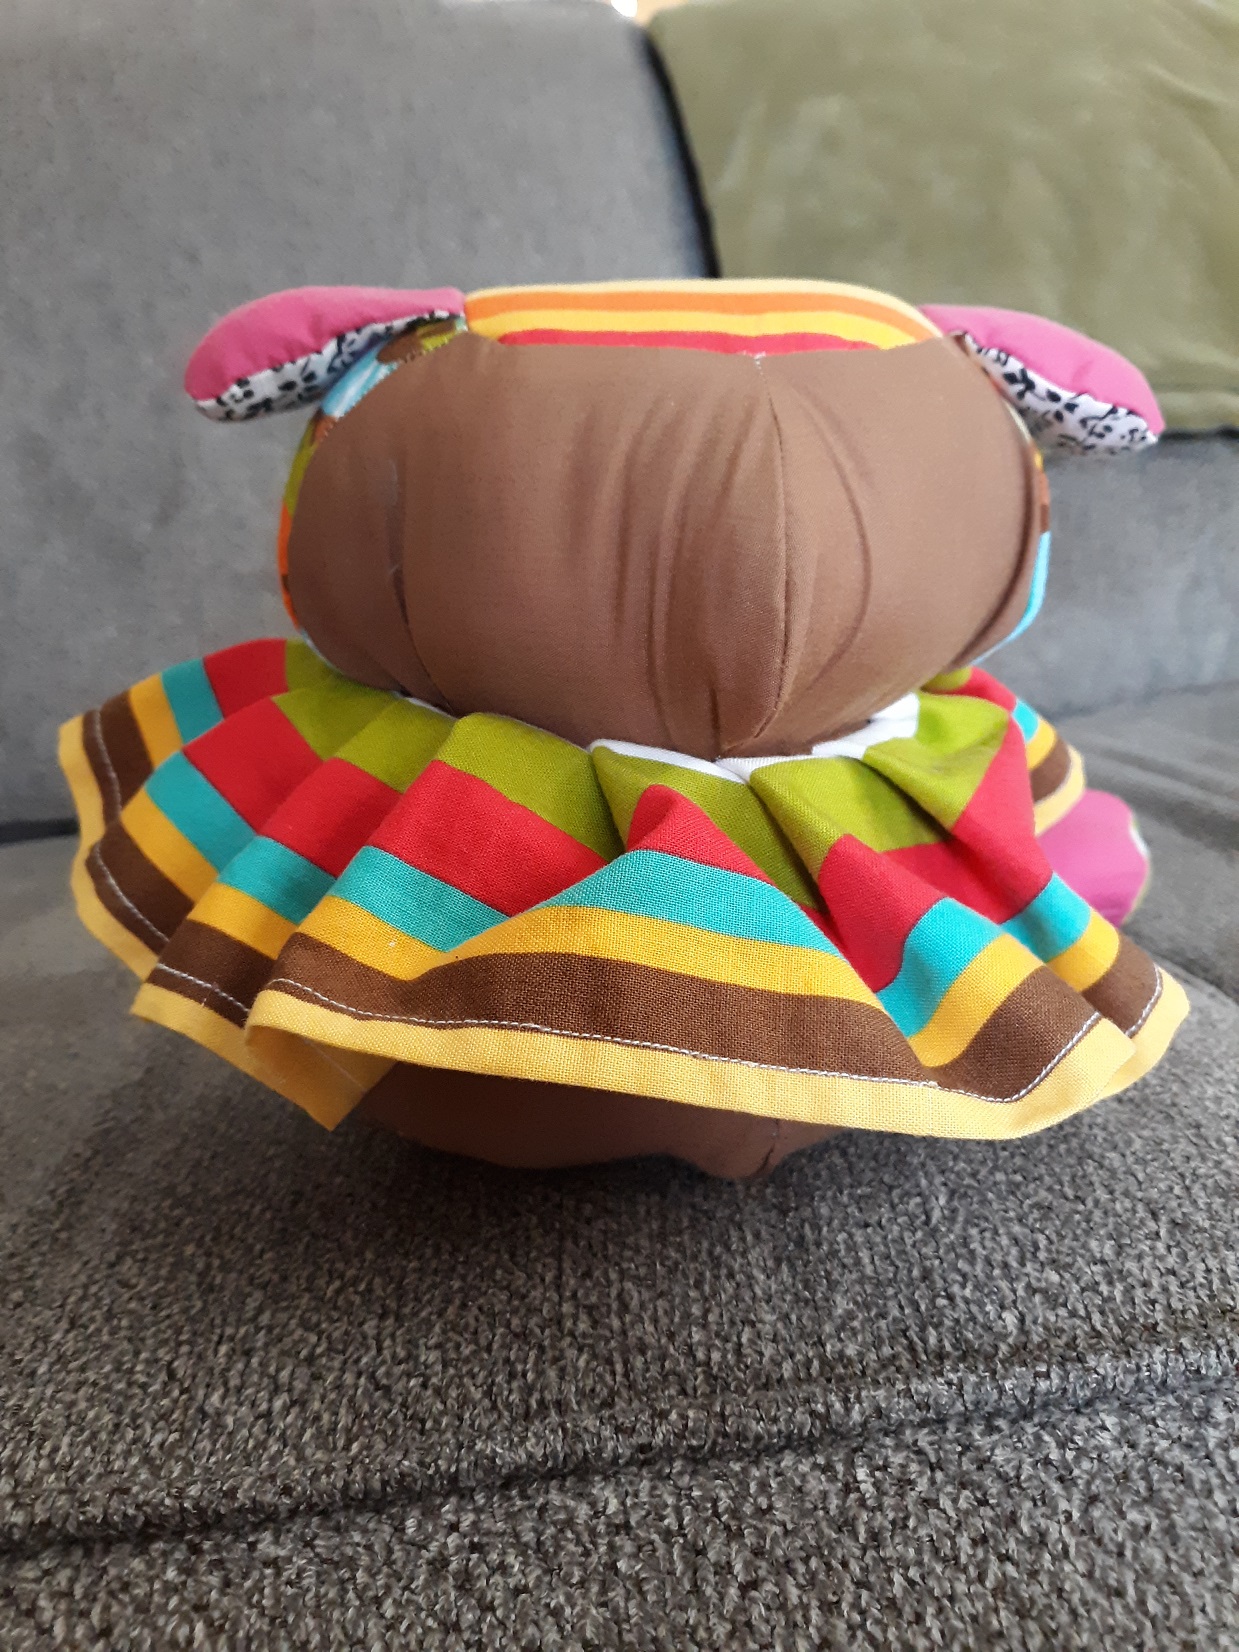 The back of the doll. You see that the top of the head and the bottom of the body has the same striped pattern has the neck ruffle. The doll has no arms.